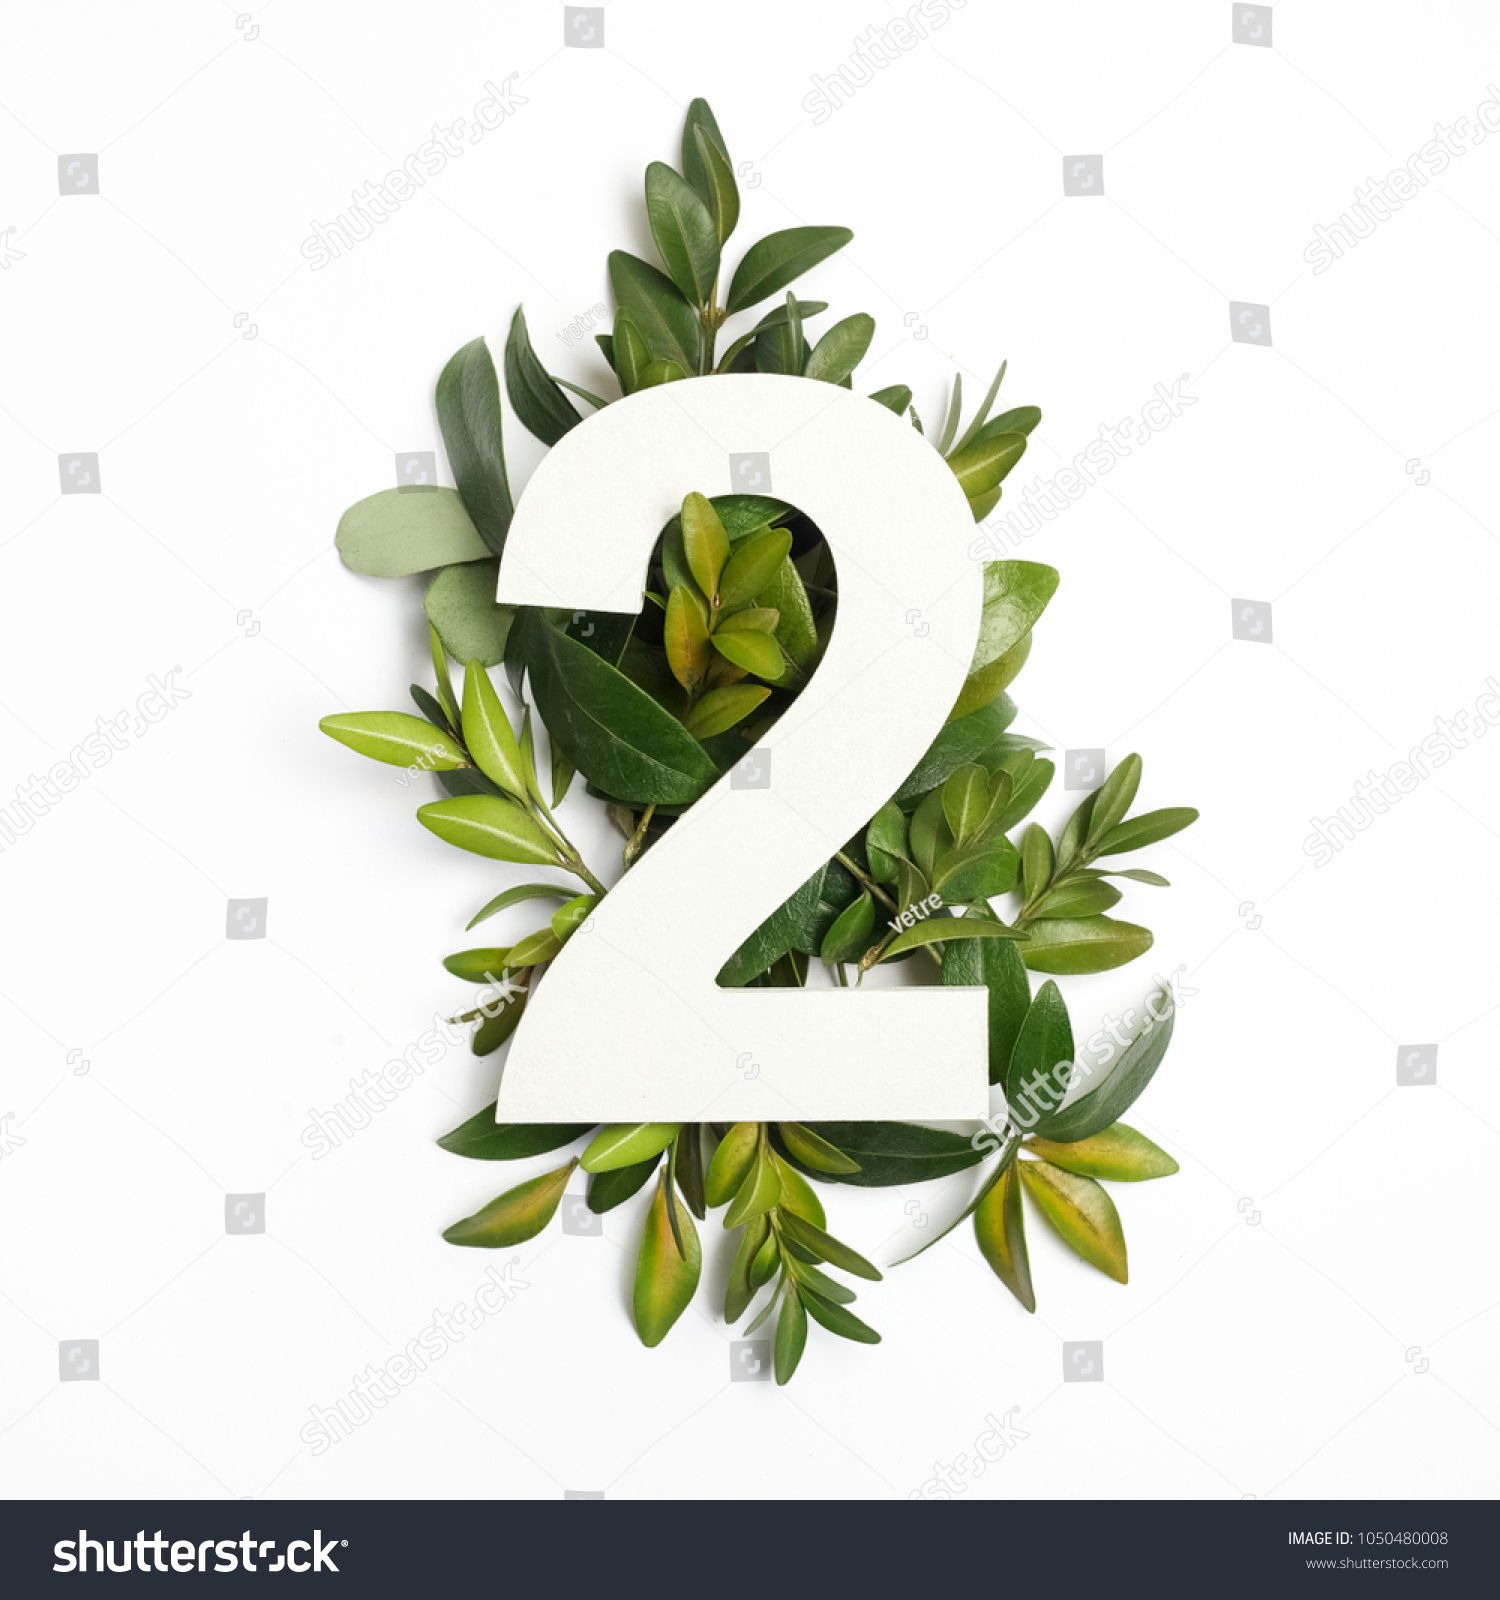 Number two shape with green leaves. Nature concept. Flat lay. Top view #1050480008